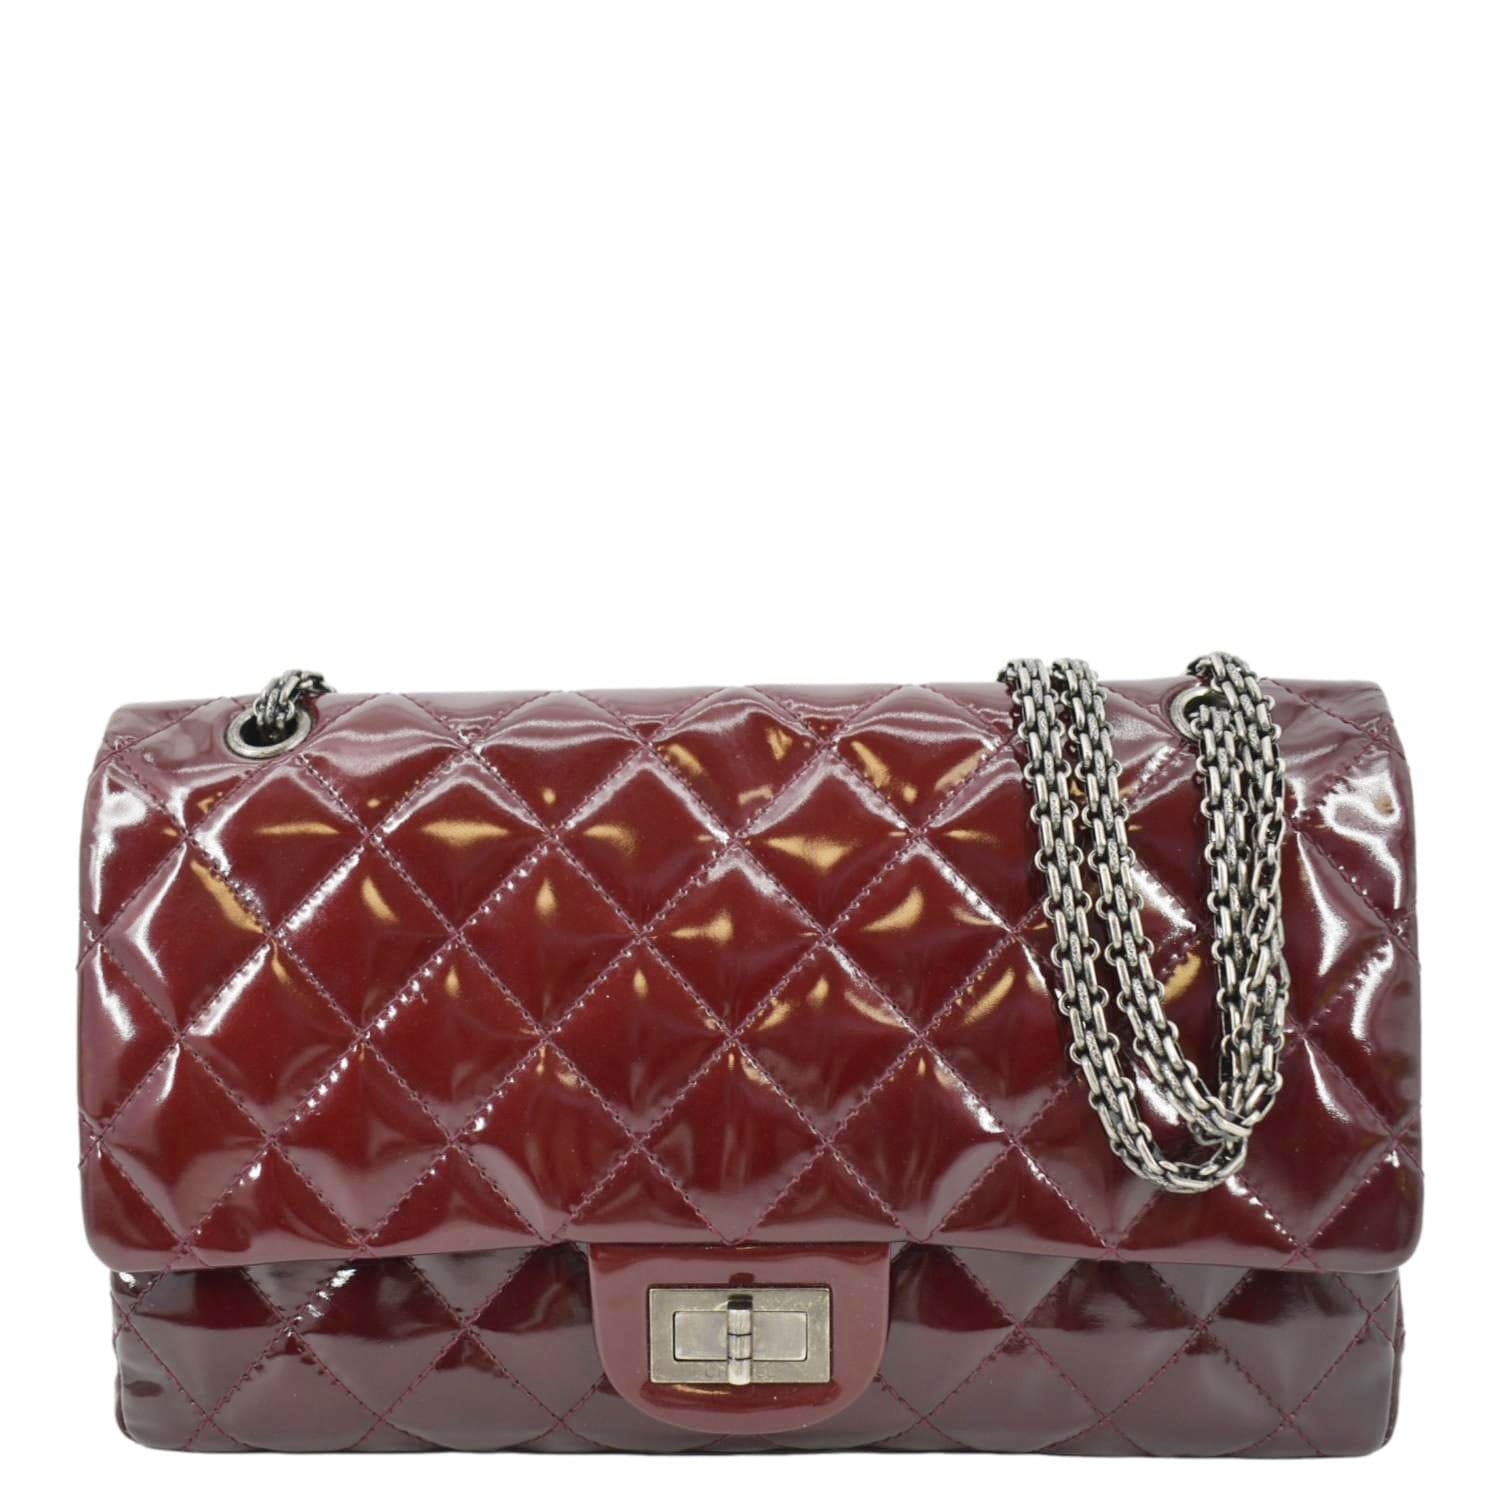 Chanel Vintage Micro Ankle Bag Red Patent GHW - ASL1663